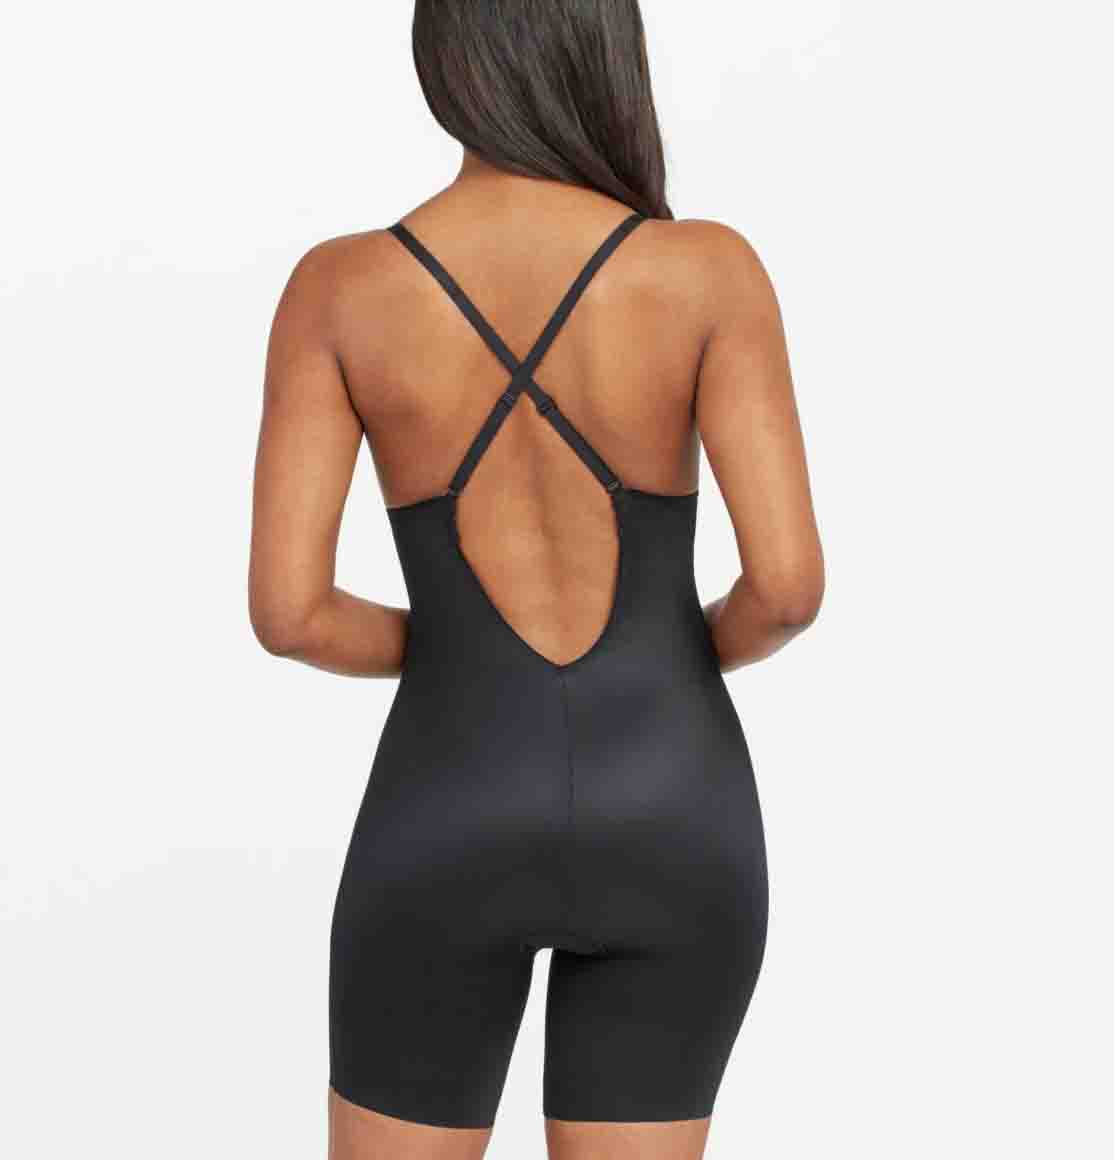 Spanx Suit Your Fancy Plunge Bodysuit, Shapewear with Convertible Straps